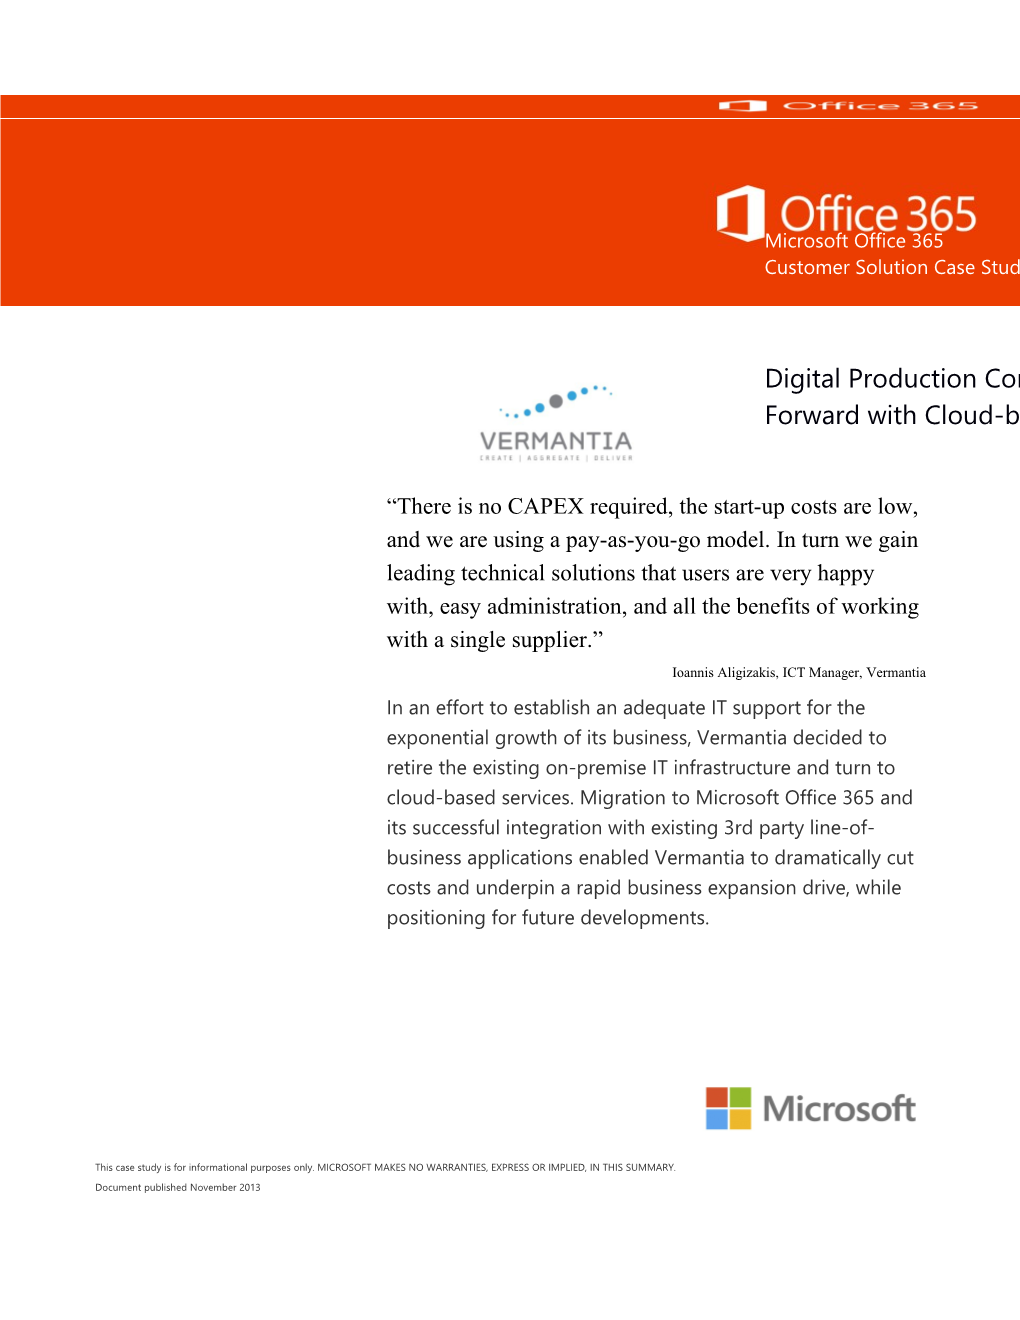 Writeimage CSB Digital Production Company Drives Business Forward with Cloud-Based Services